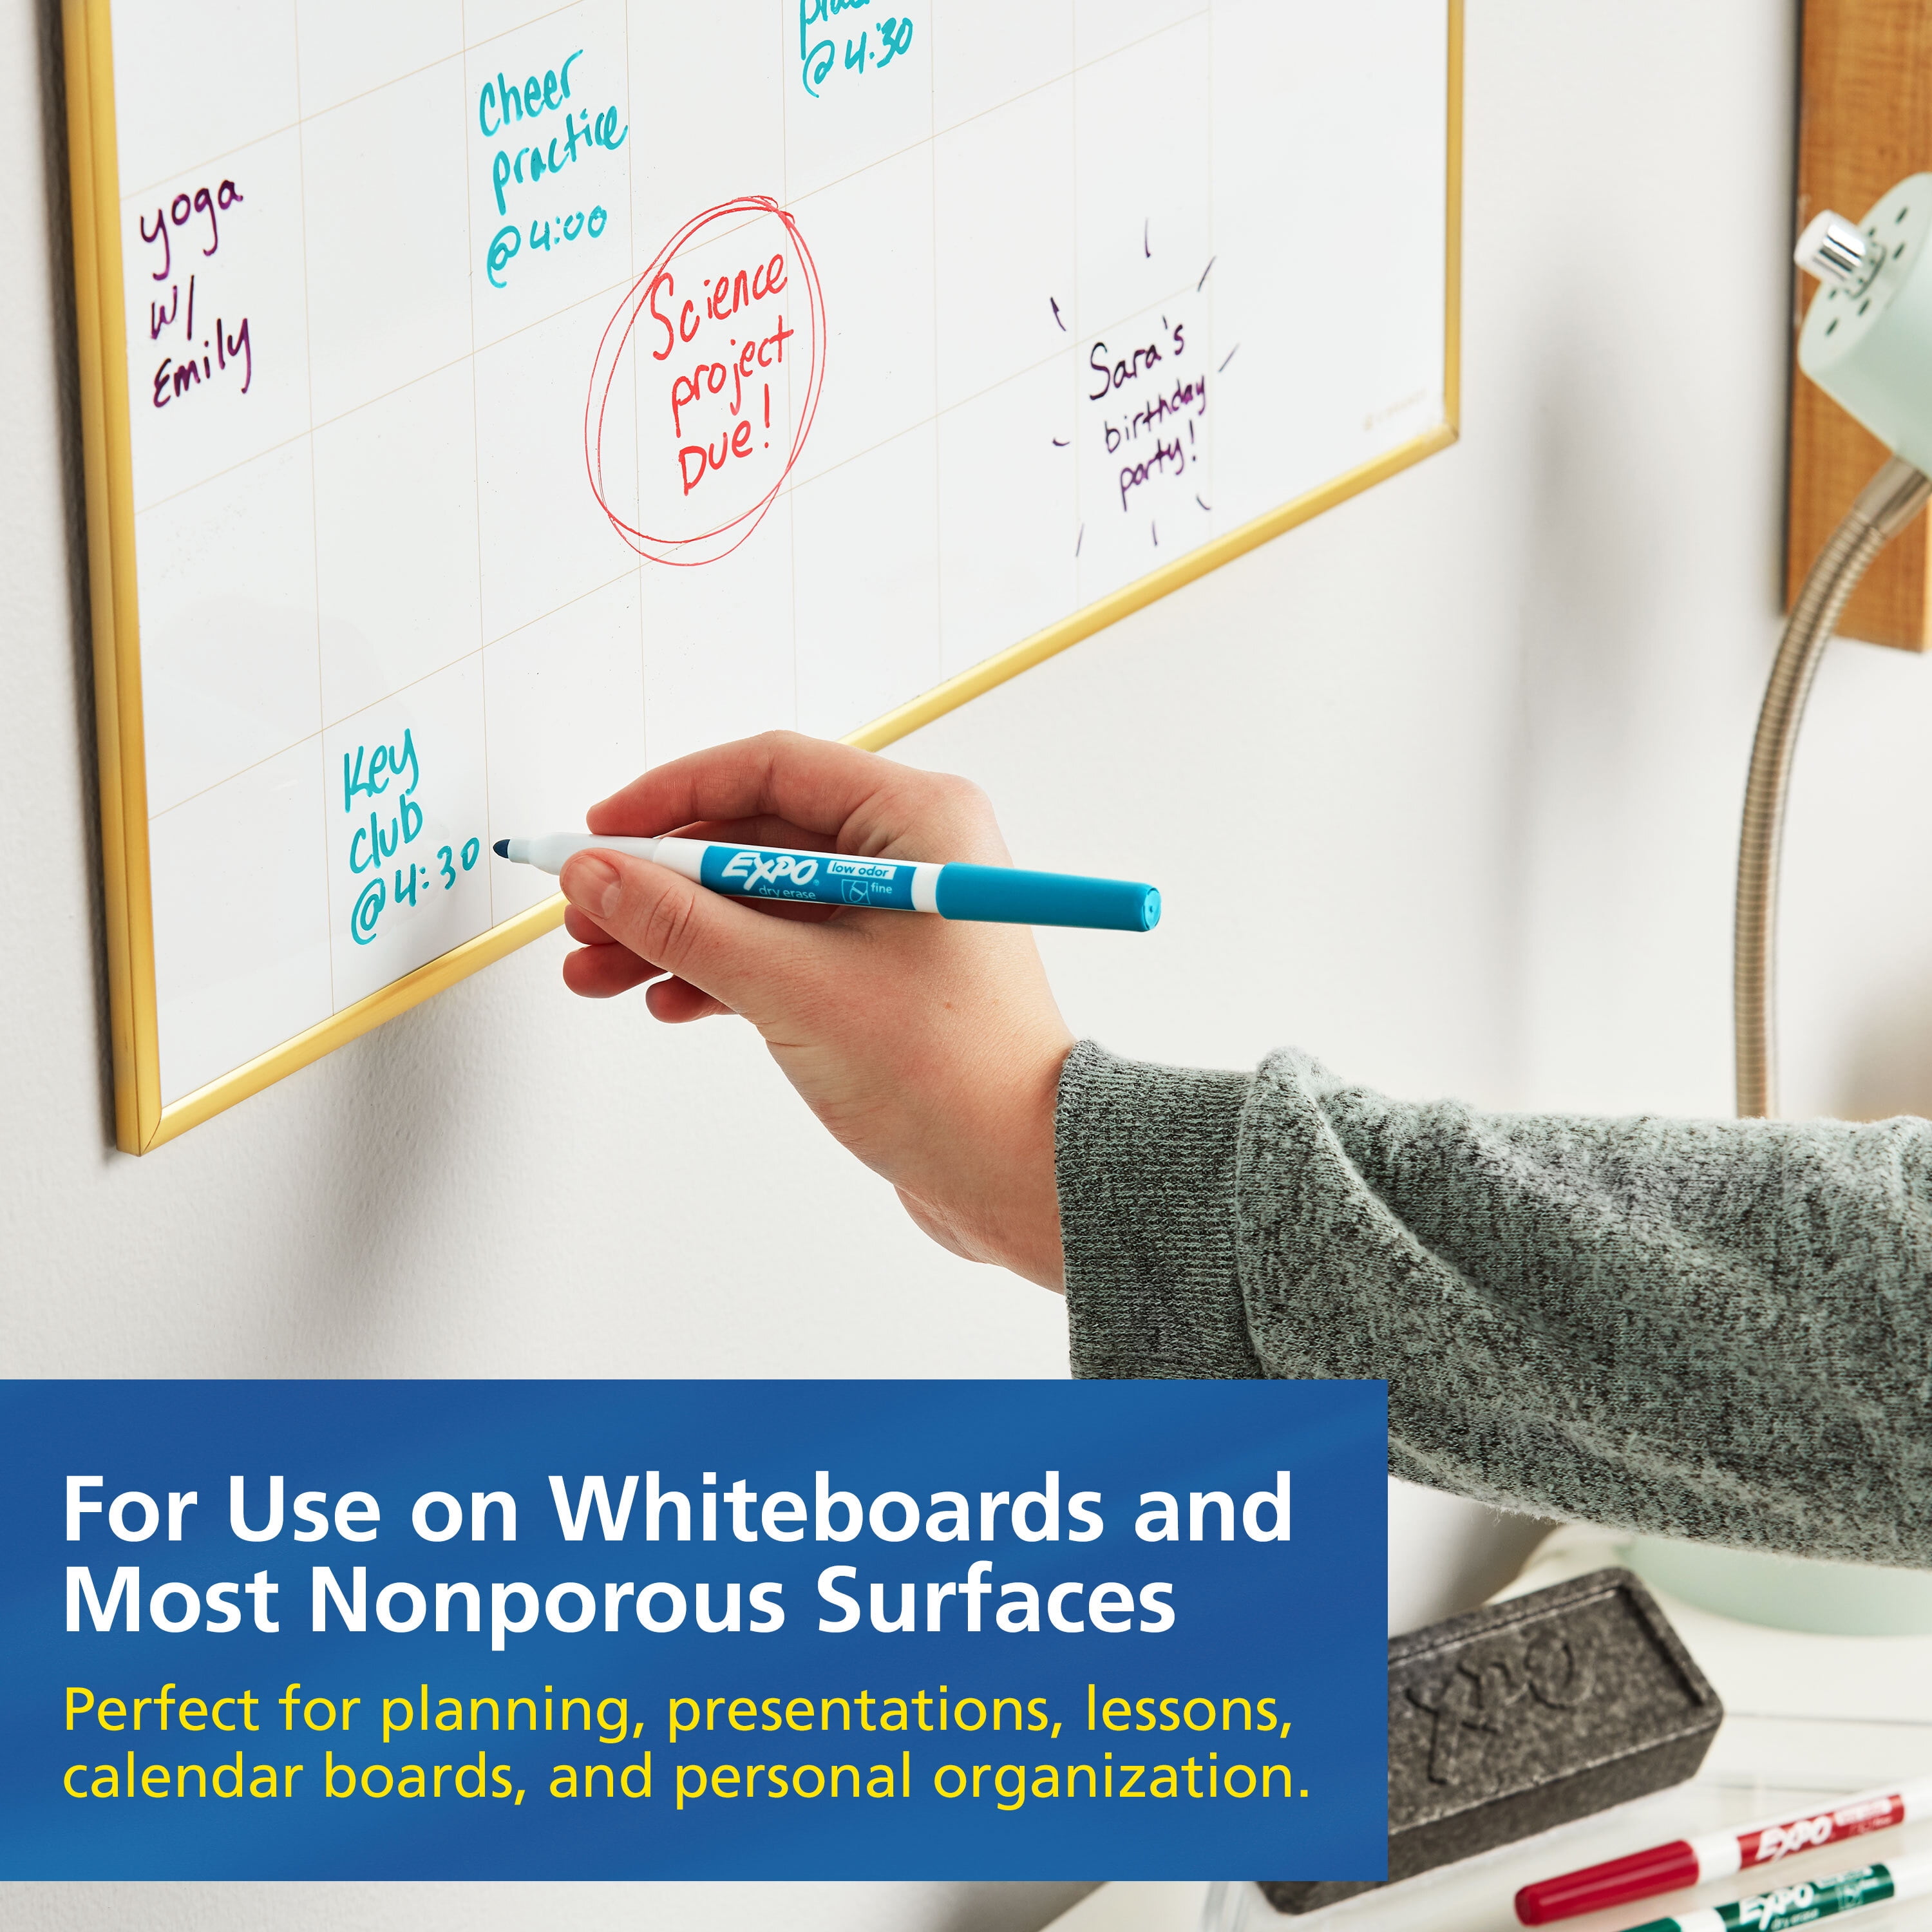 Premium Dry Erase Marker Kit: StoreSMART - Filing, Organizing, and Display  for Office, School, Warehouse, and Home